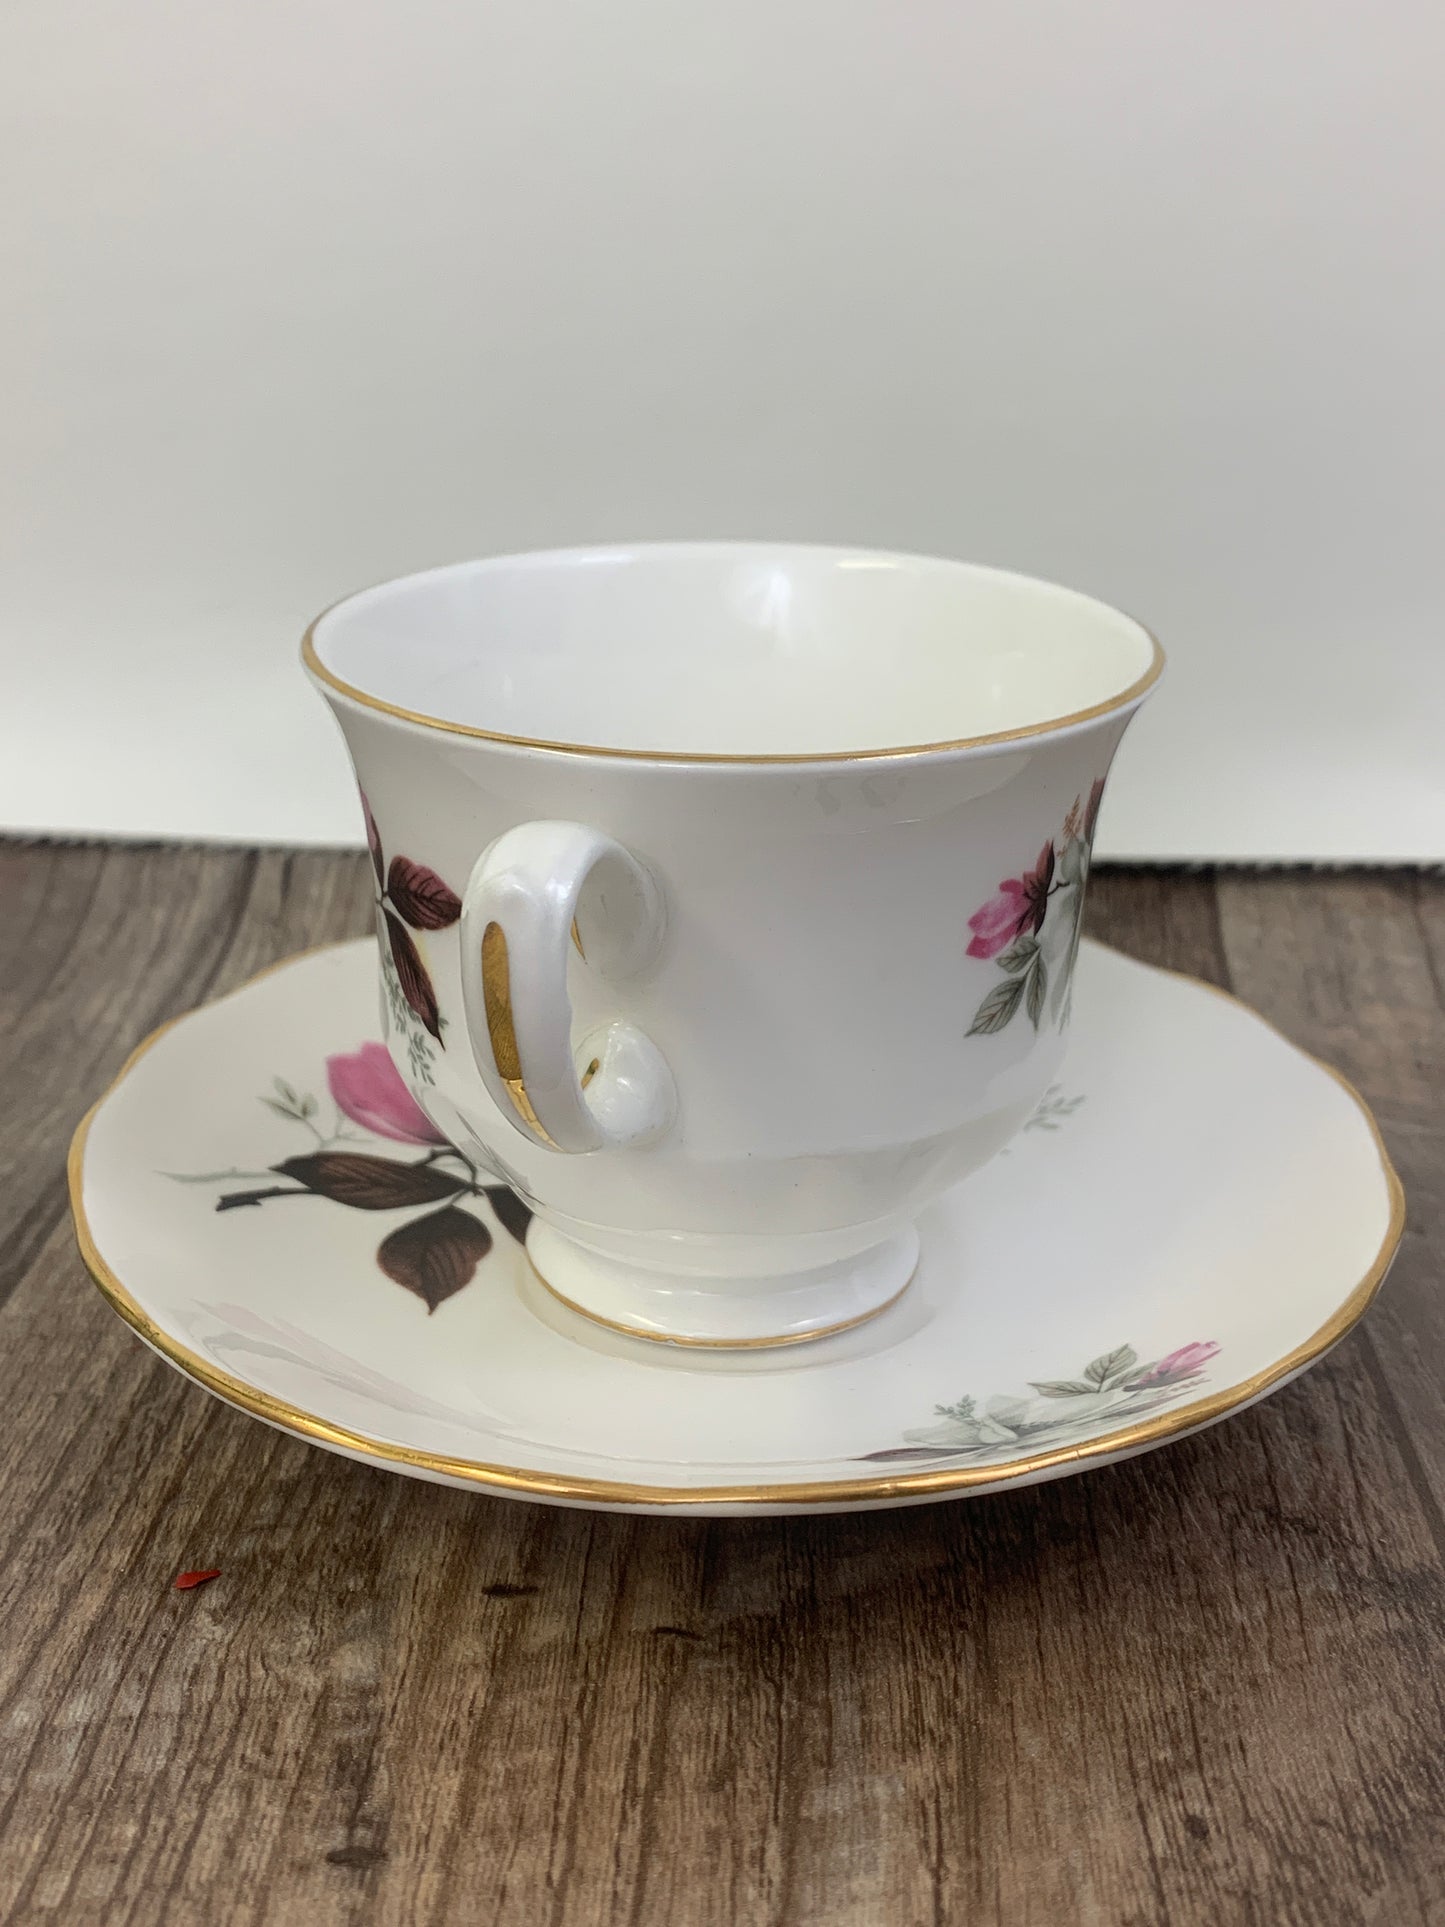 Pink and White Floral Teacup Queen Anne Tea Cup Mothers Day Gifts